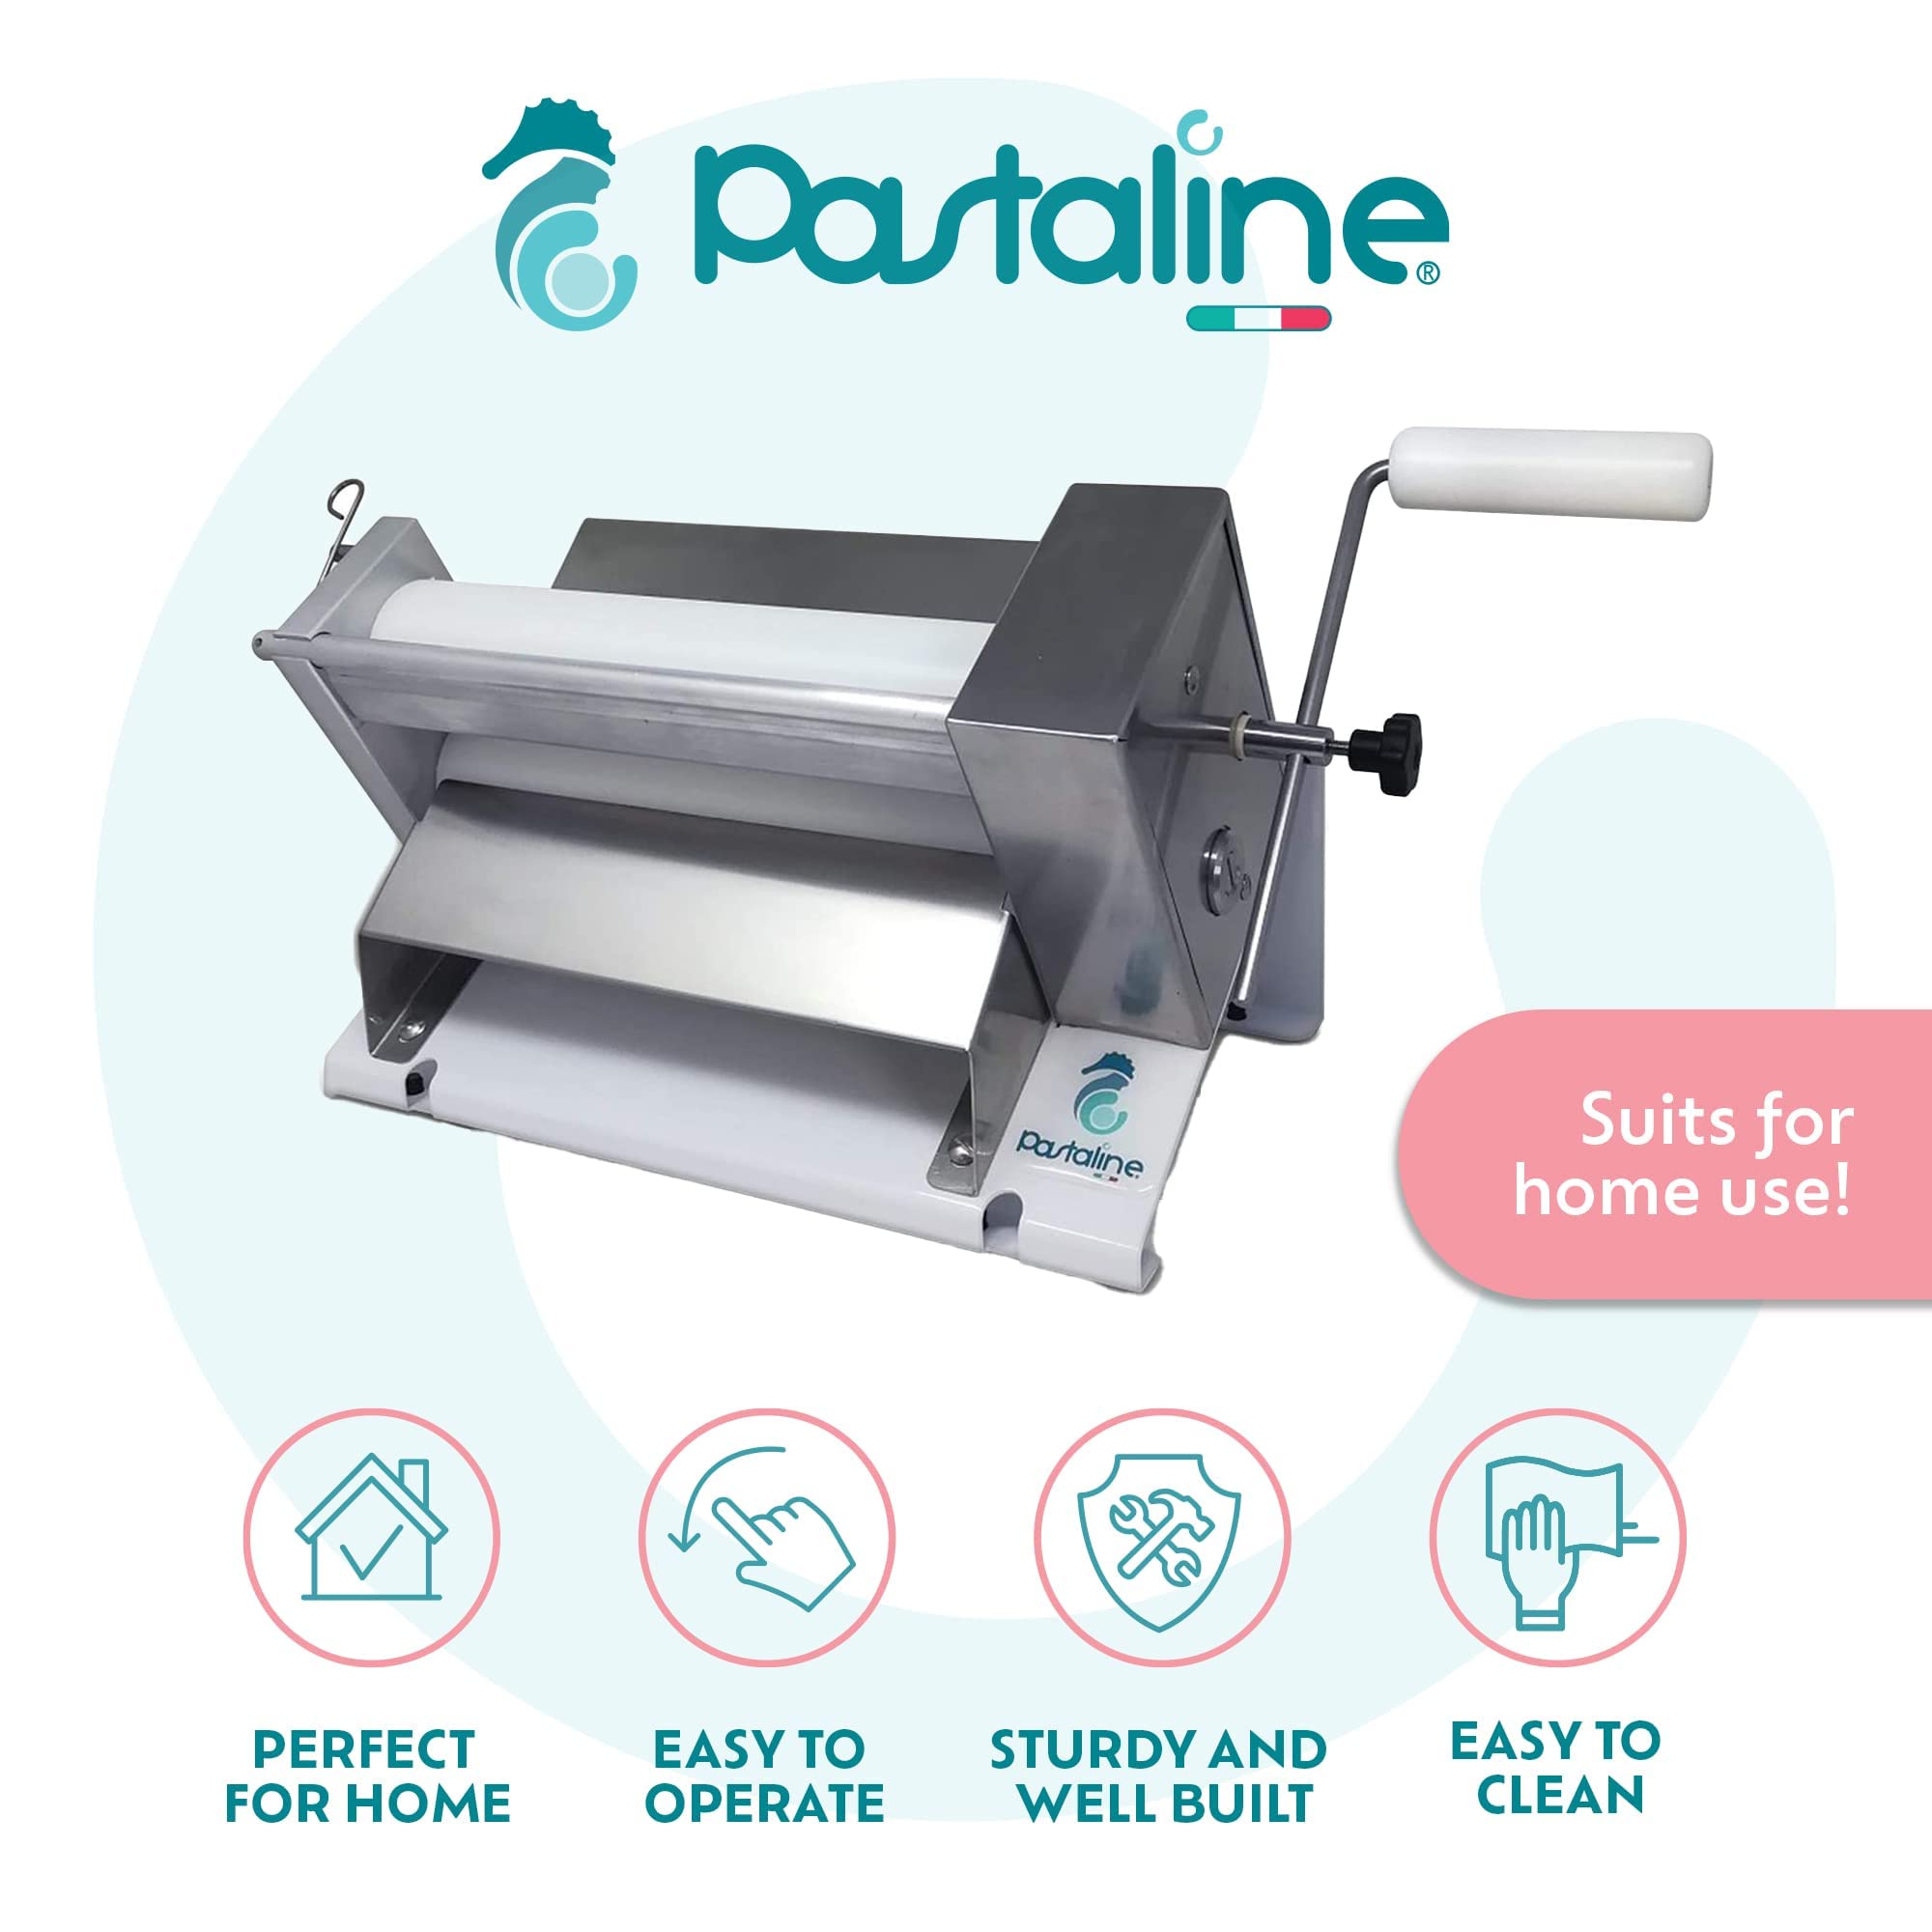 Pastaline Manual Dough Sheeter Machine - Sfogliacile NSF Manual Pasta Maker Machine for Icing, Marzipan and Puff Pastry | Easy Install Dough Sheeter Machine for Home or Small Commercial Kitchens